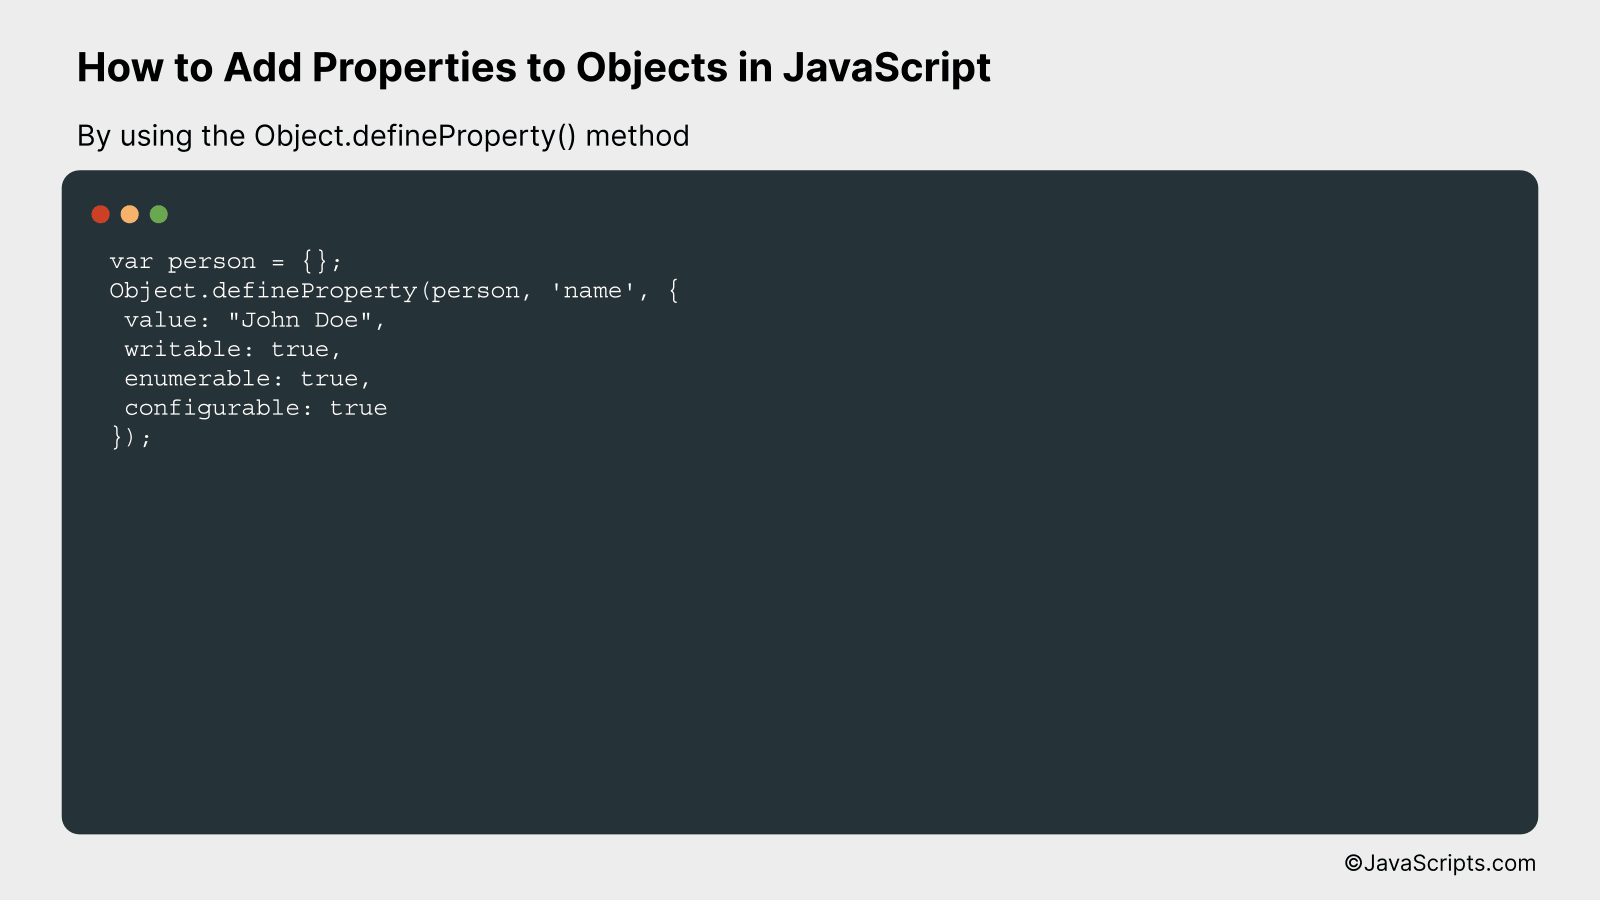 By using the Object.defineProperty() method